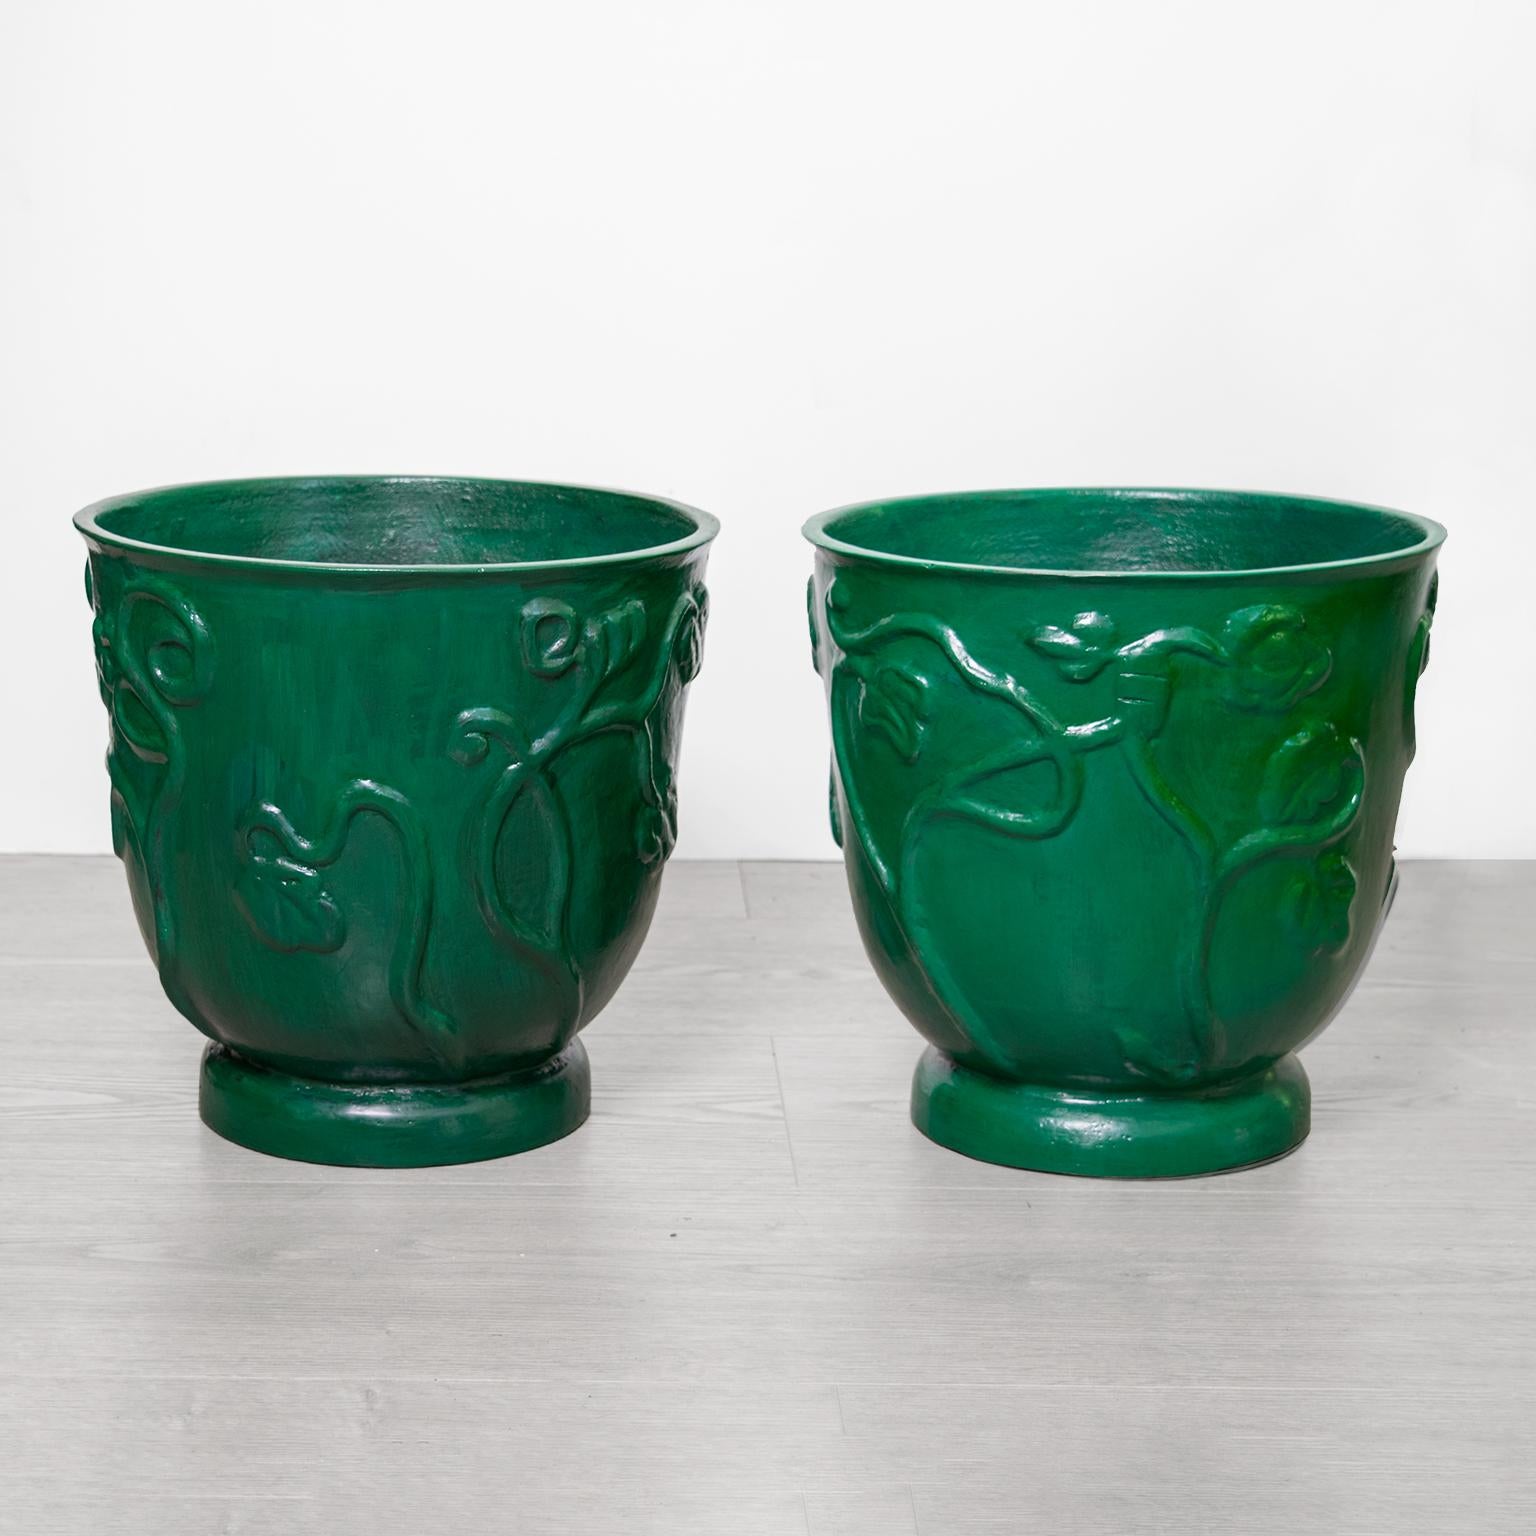 Pair of Scandinavian Modern, Carl Milles designed patinated cast iron urns. The urns have raised stylized floral designs and softly rounded bases. The urns have been newly patinated in deep greens. 

Carl Milles' work is internationally recognized